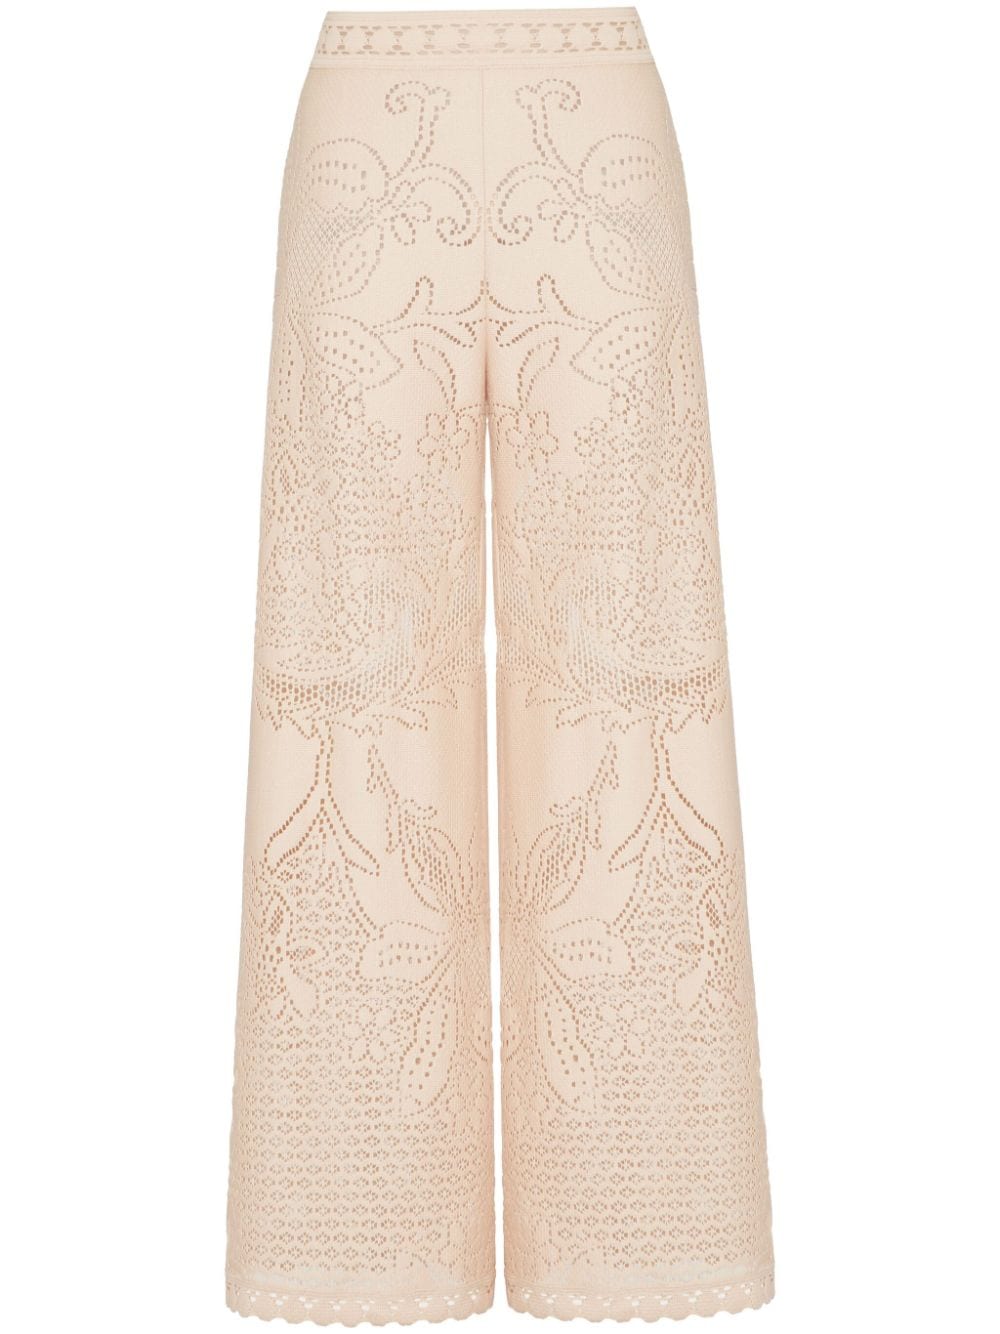 Image 1 of Valentino Garavani floral-embroidered wide-leg trousers